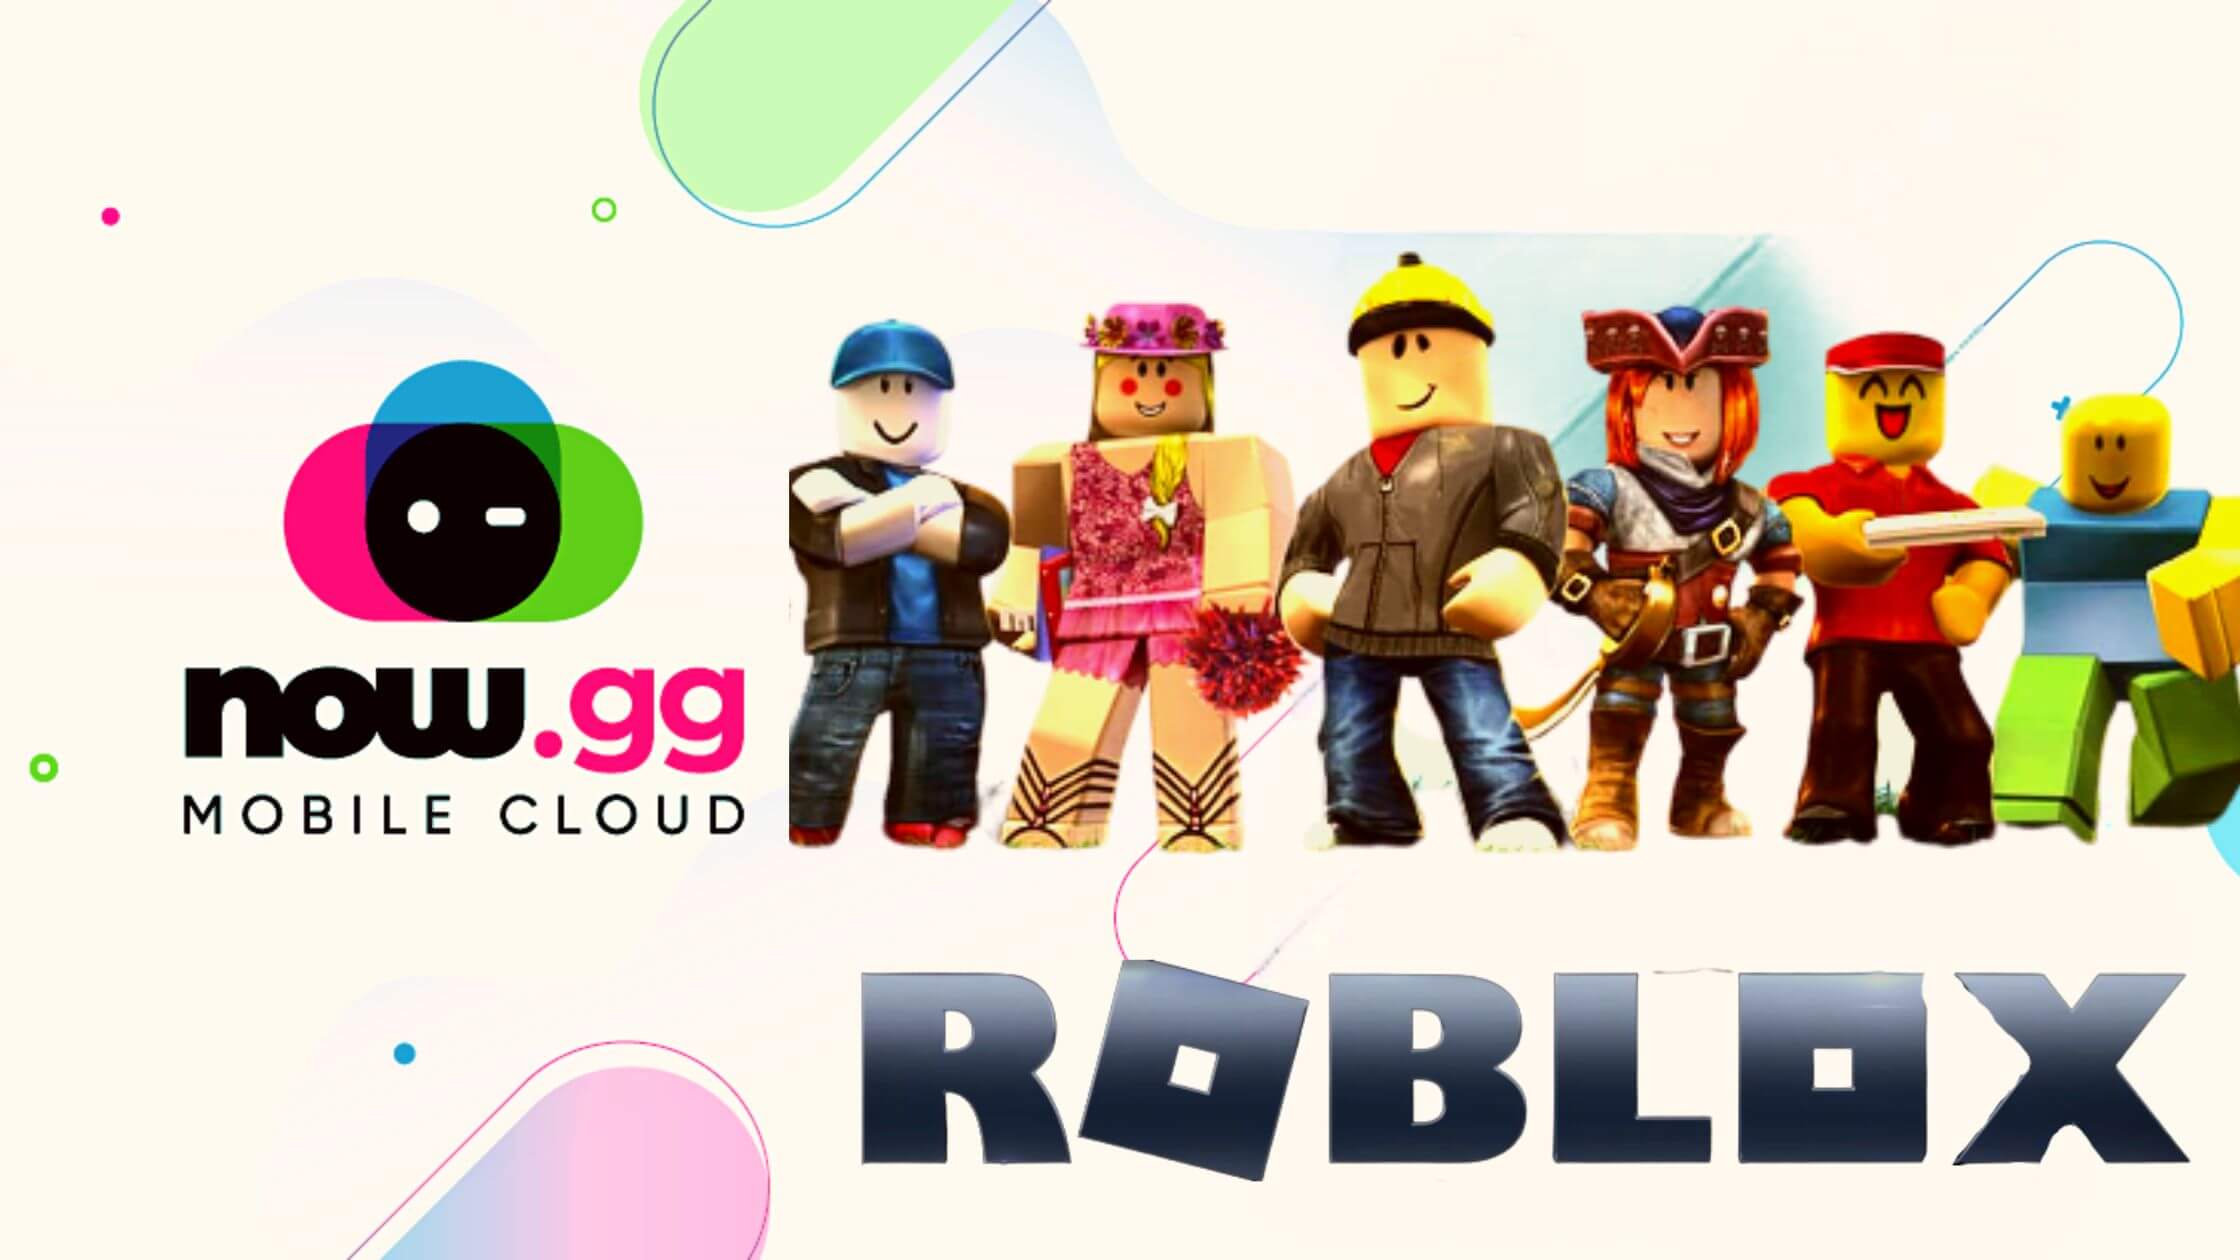 Roblox Is Announced In Now.gg, How To Get The Game On Pc And Mobile